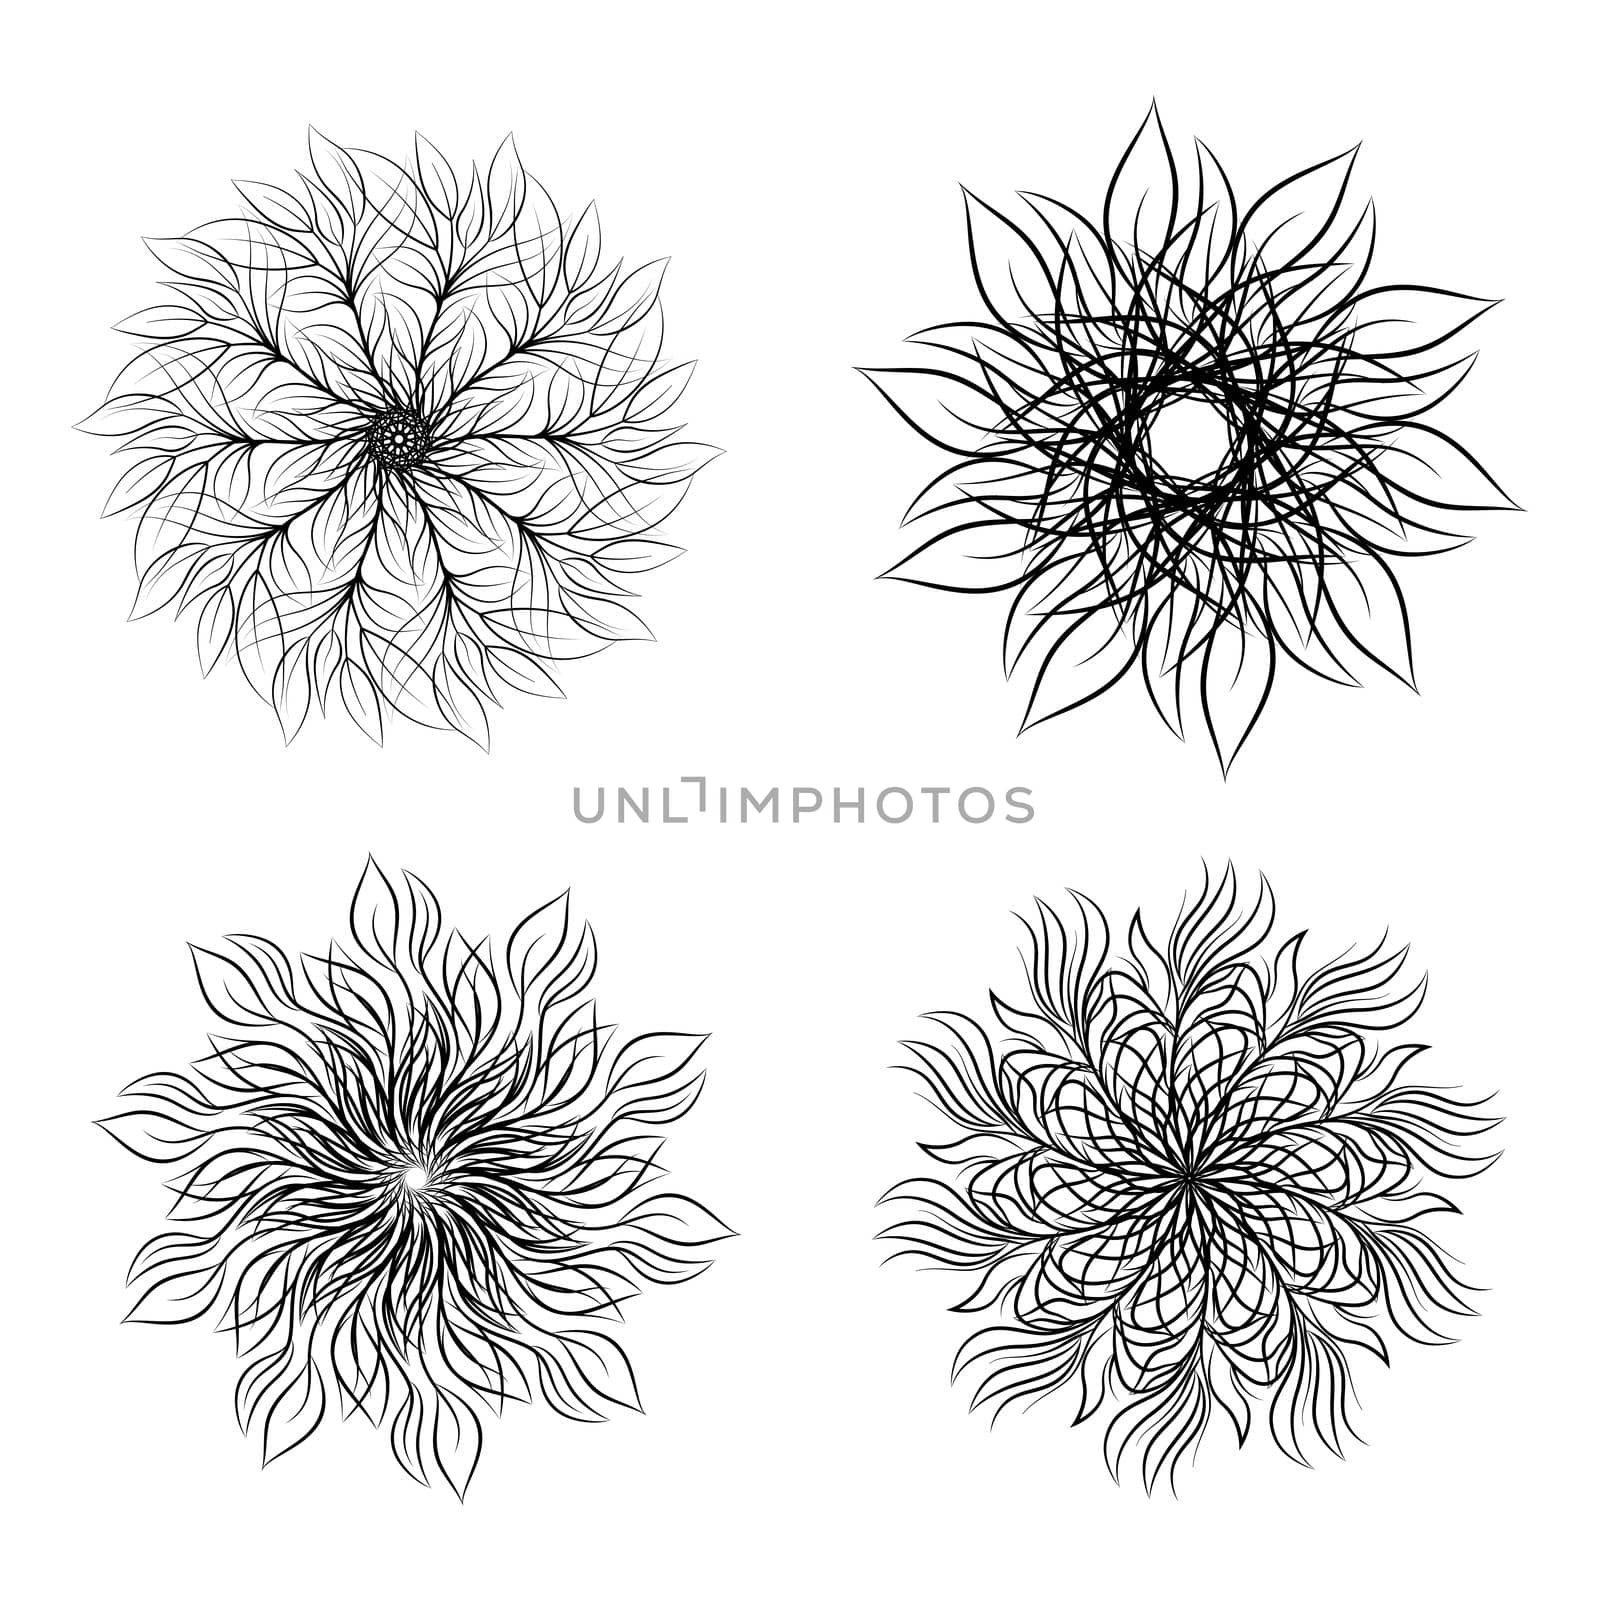 Set of round floral ornaments isolated on white background. Decorative design element. Outline illustration for invitation, greeting cards, print on T-shirt and other items.